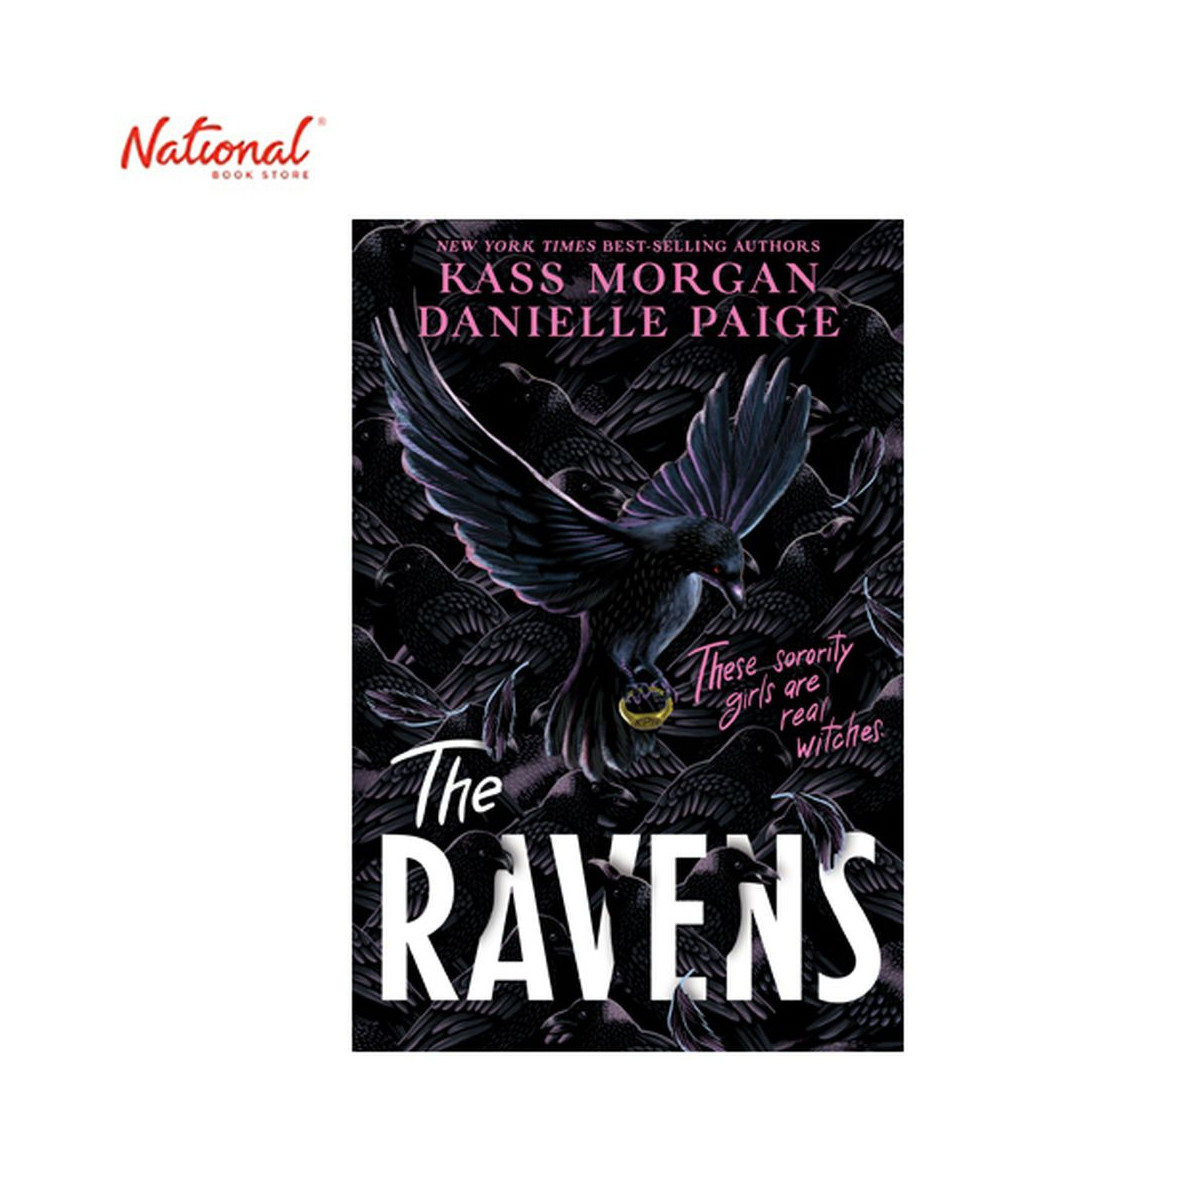 Ravens Trade Paperback by Kass Morgan & Danielle Paige